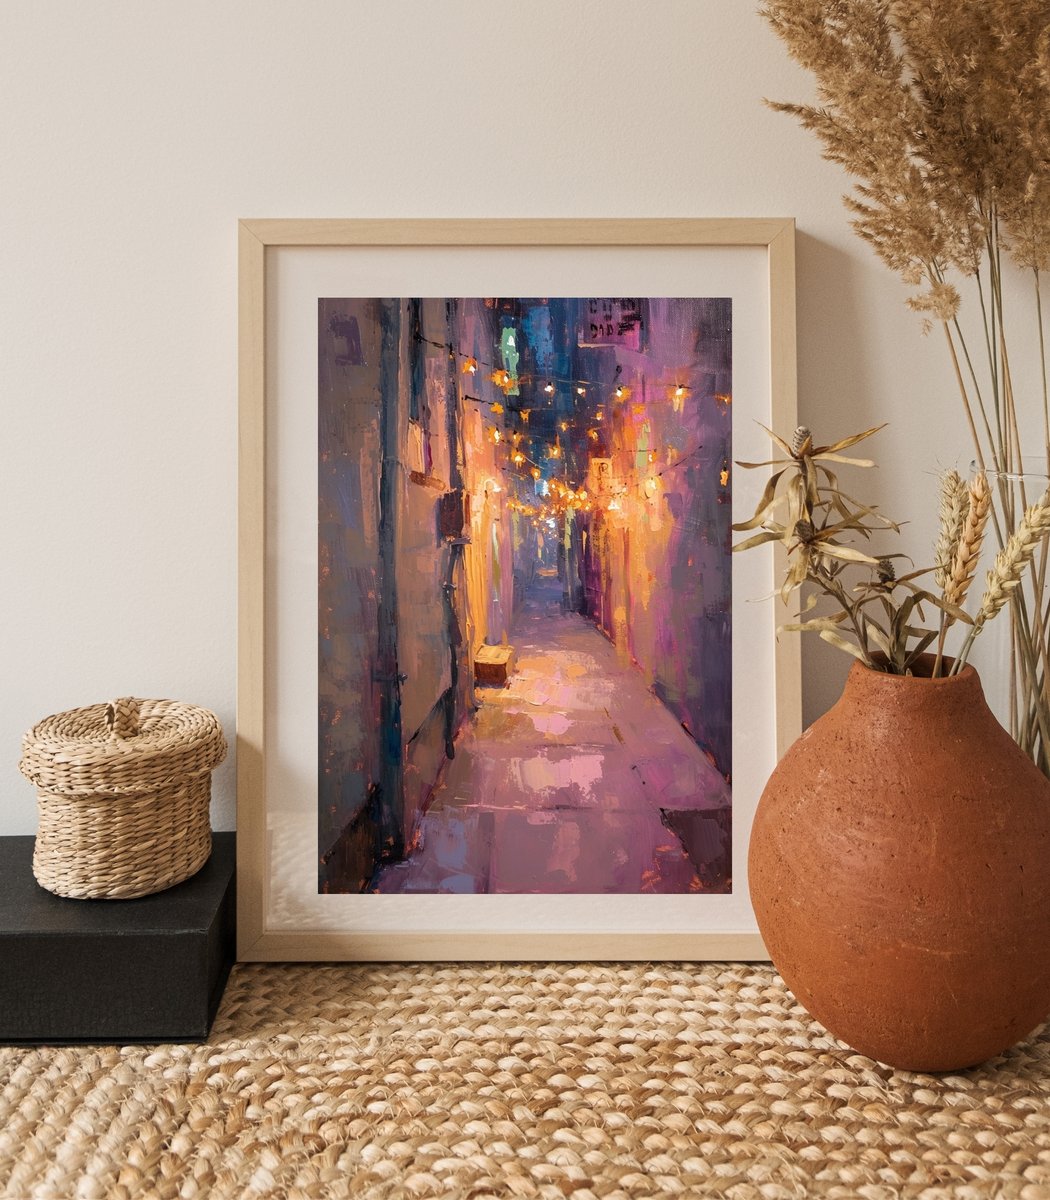 Wander through the twinkling alleys of your imagination with this evocative street scene print from Lena Art Design. 🌟🏙️ Every brushstroke invites you into a world of mystery and charm. #CityLights #ArtisticJourney #LenaArtDesign